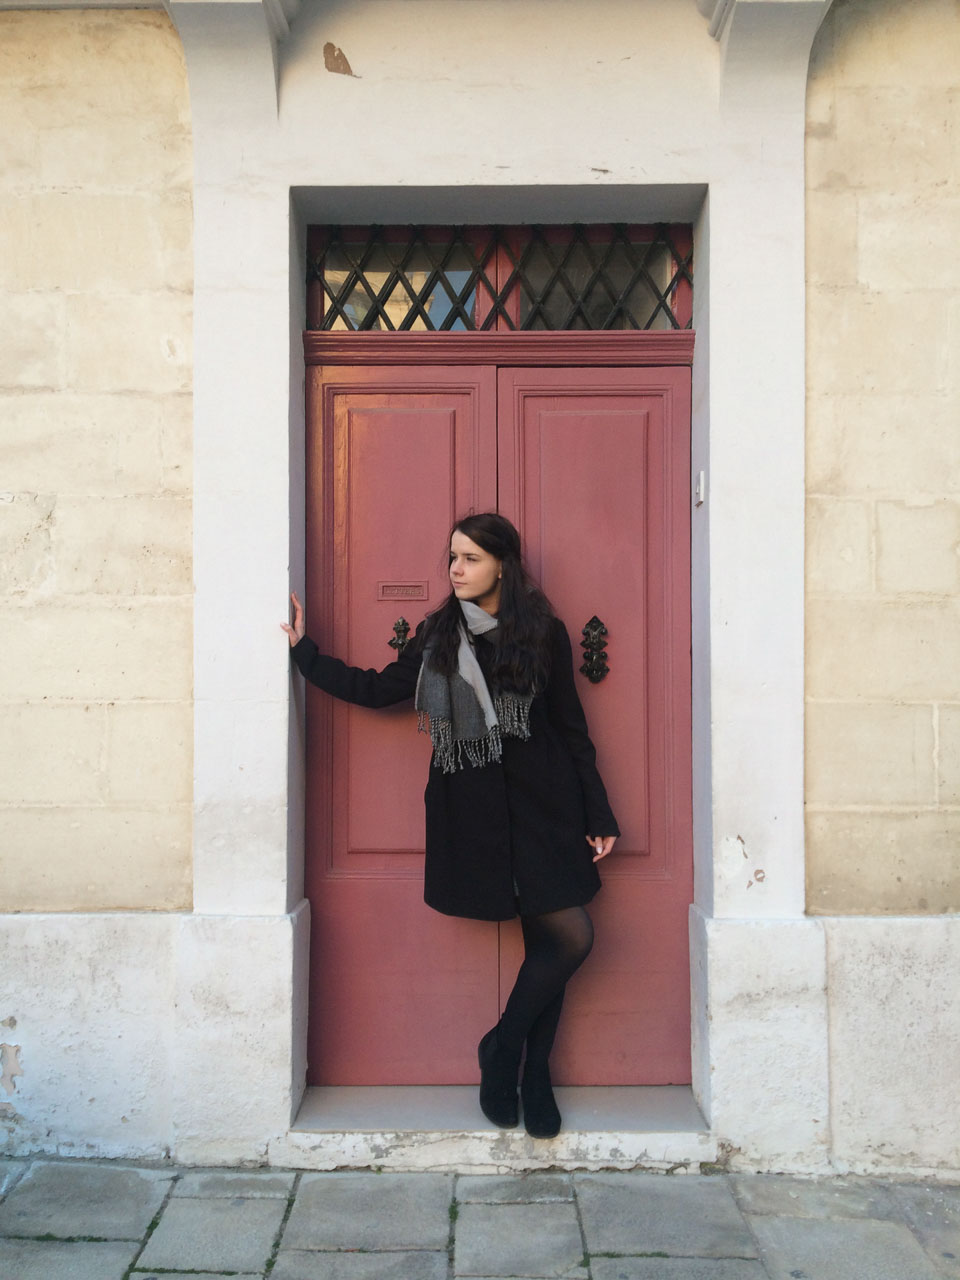 A girl standing in a colourful doorway in Mdina, Malta